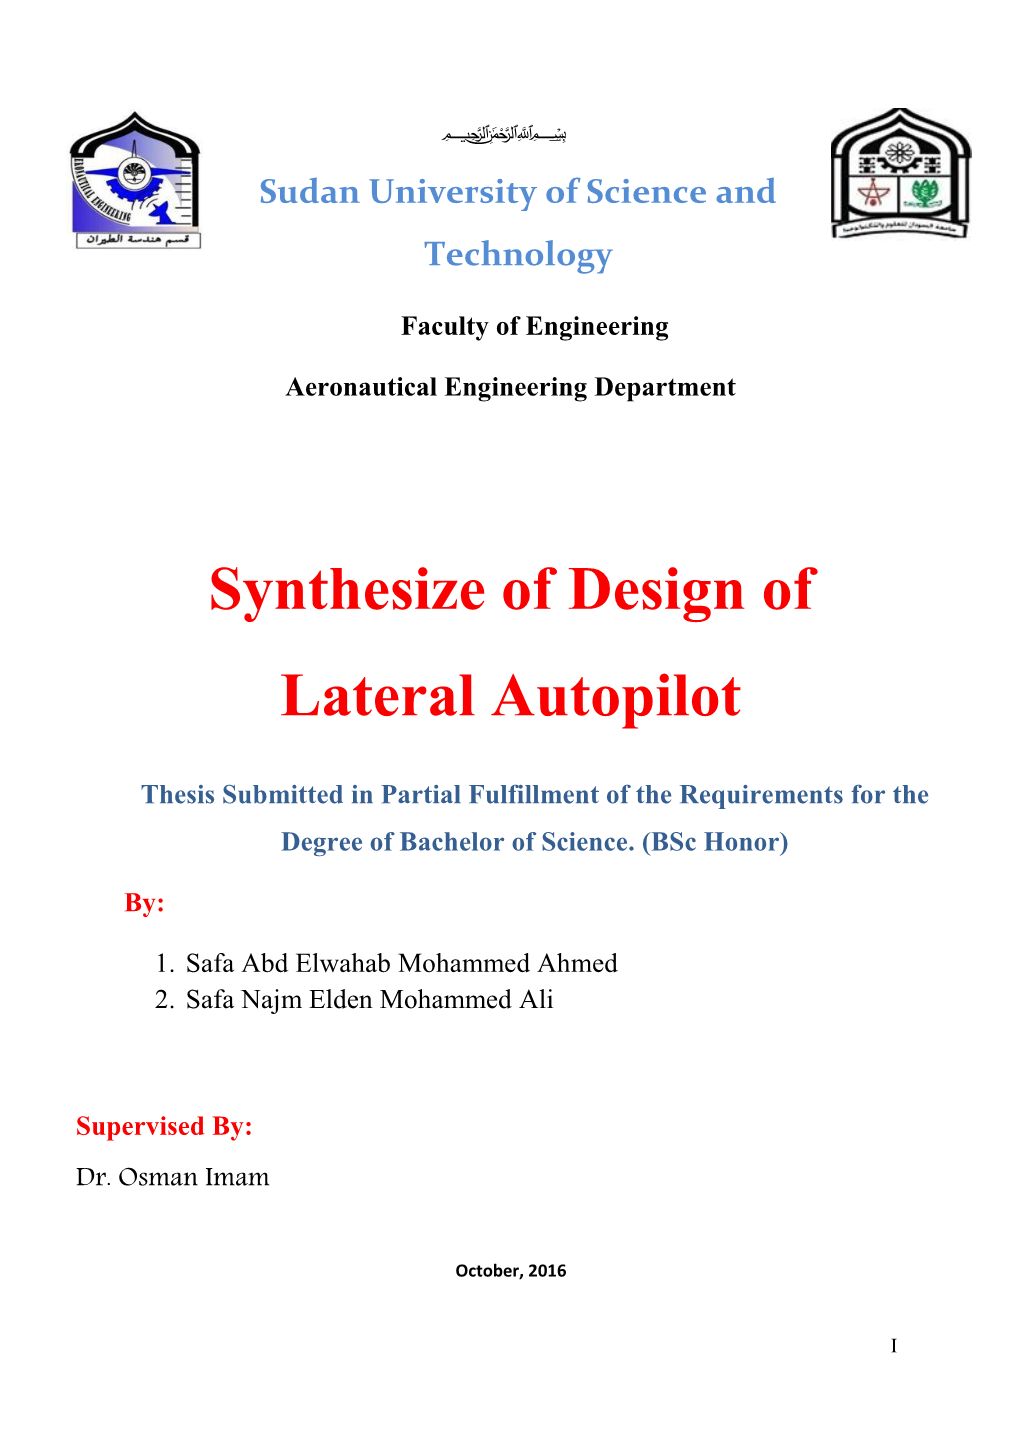 Synthesize of Design of Lateral Autopilot